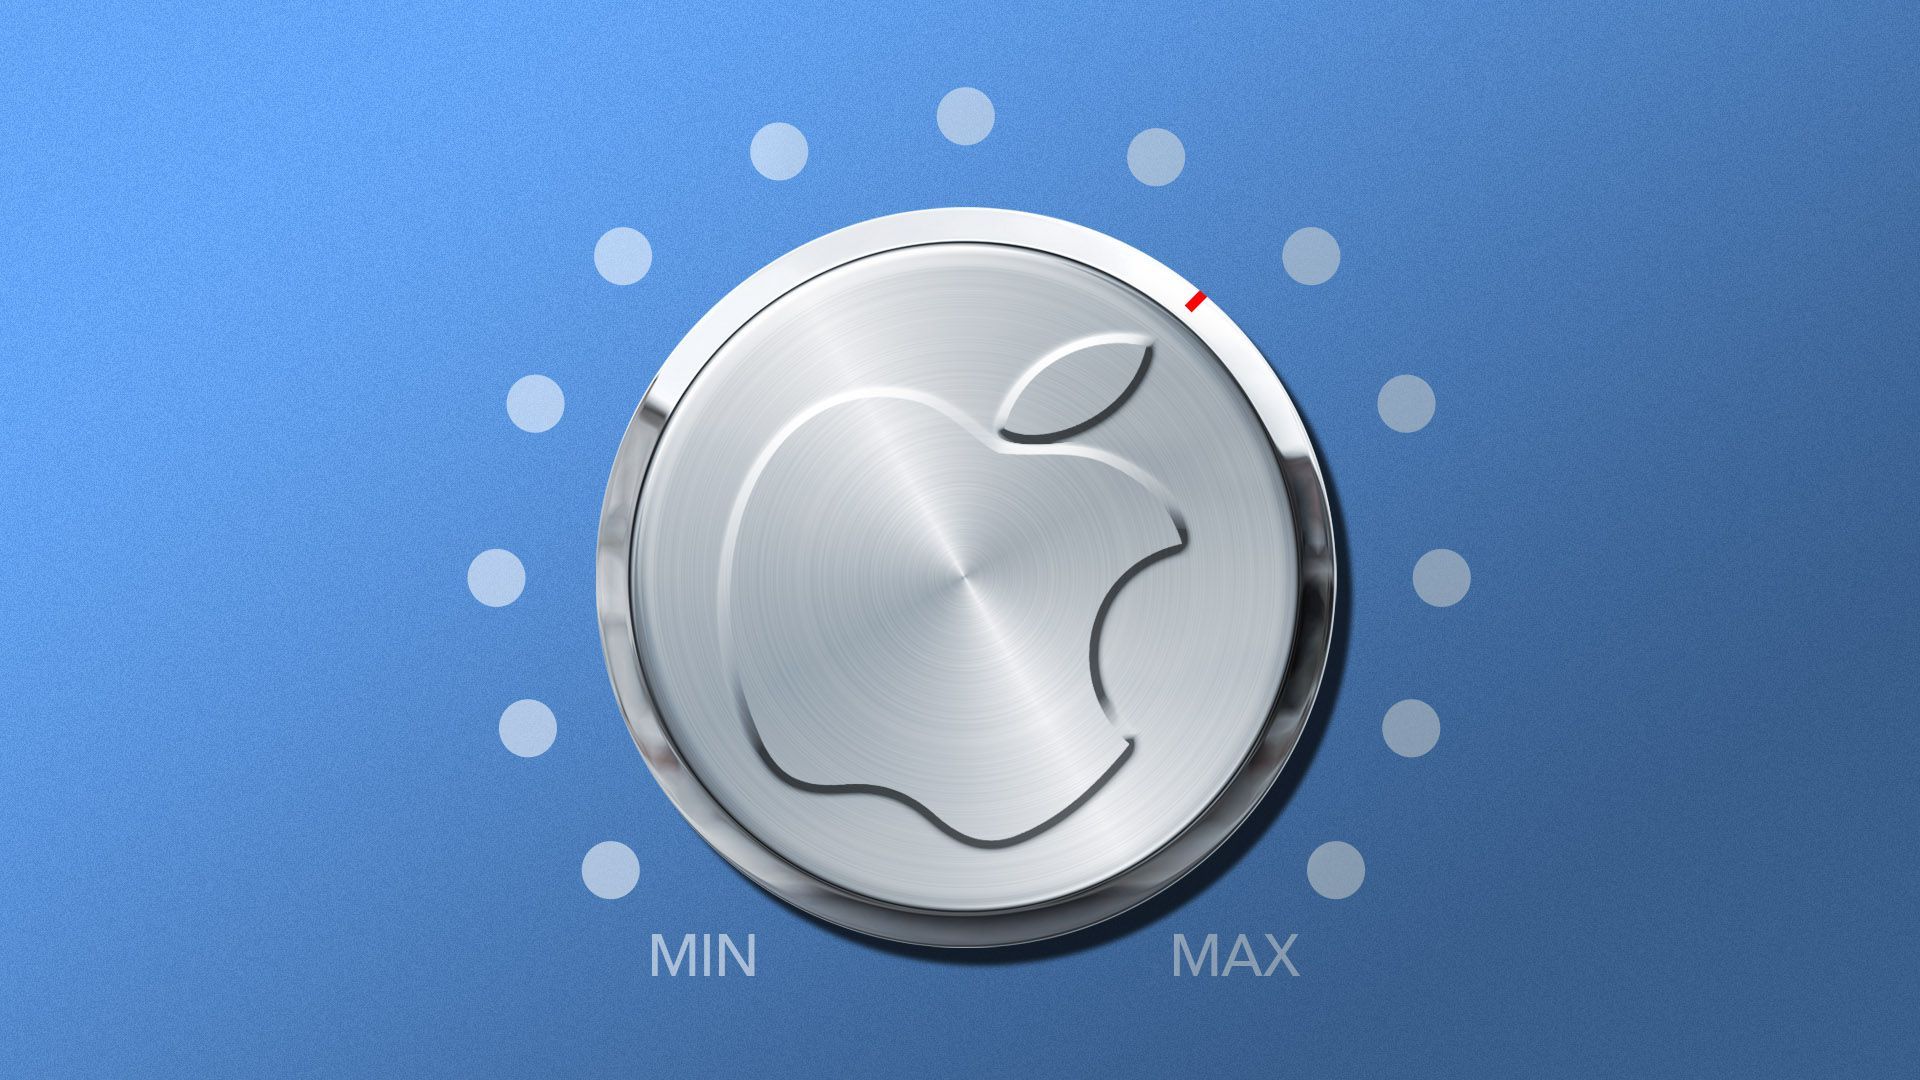 Illustration of a volume dial with the Apple logo on it